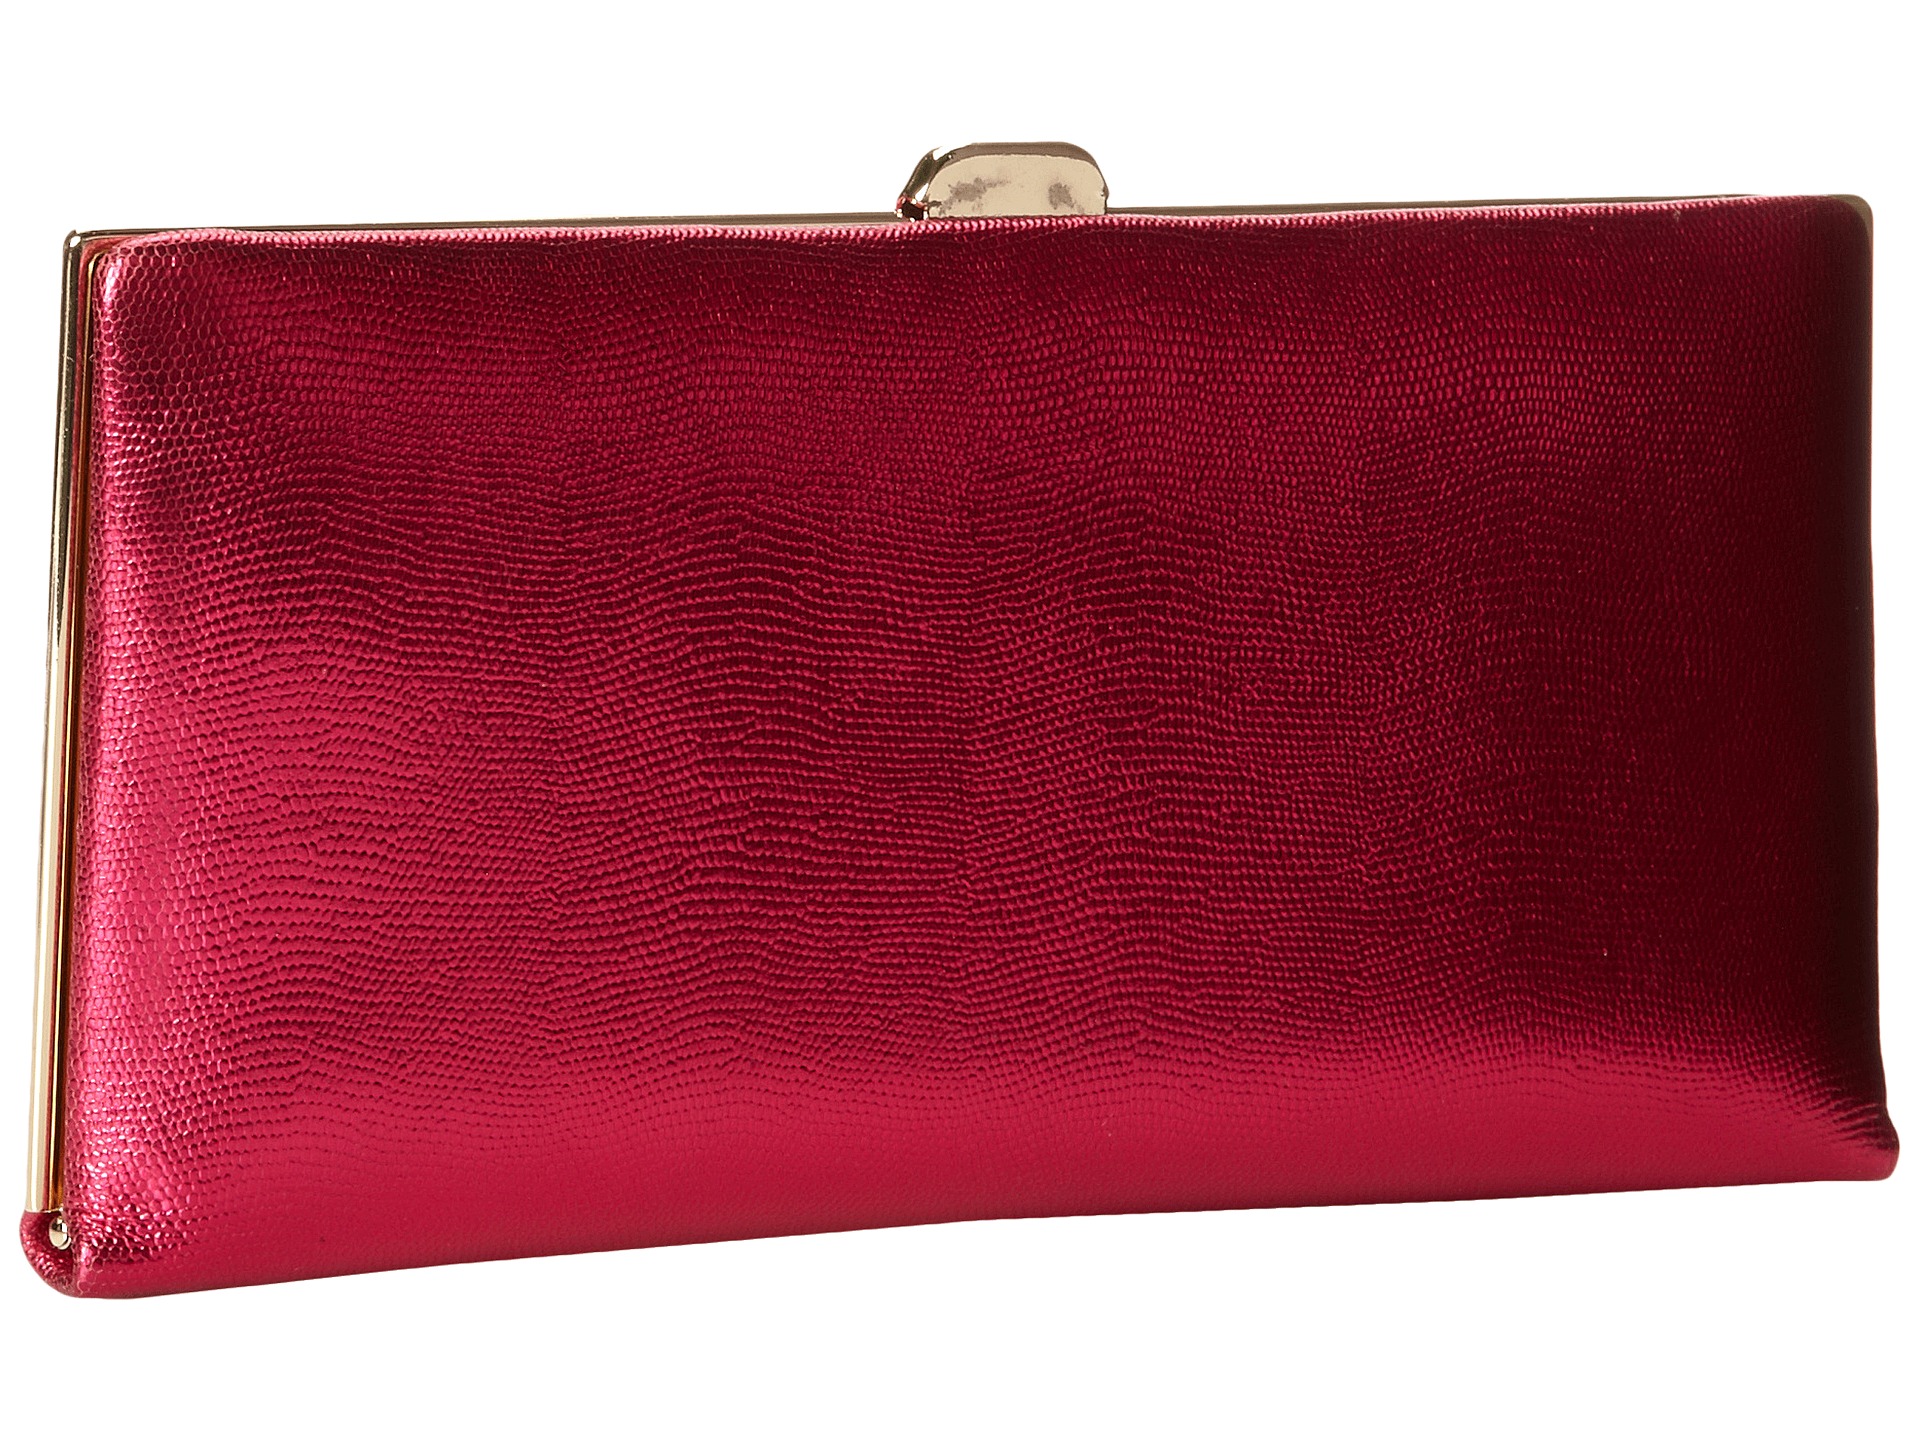 Lodis Accessories Clearlake Quinn Clutch Wallet Magenta | Shipped Free at Zappos